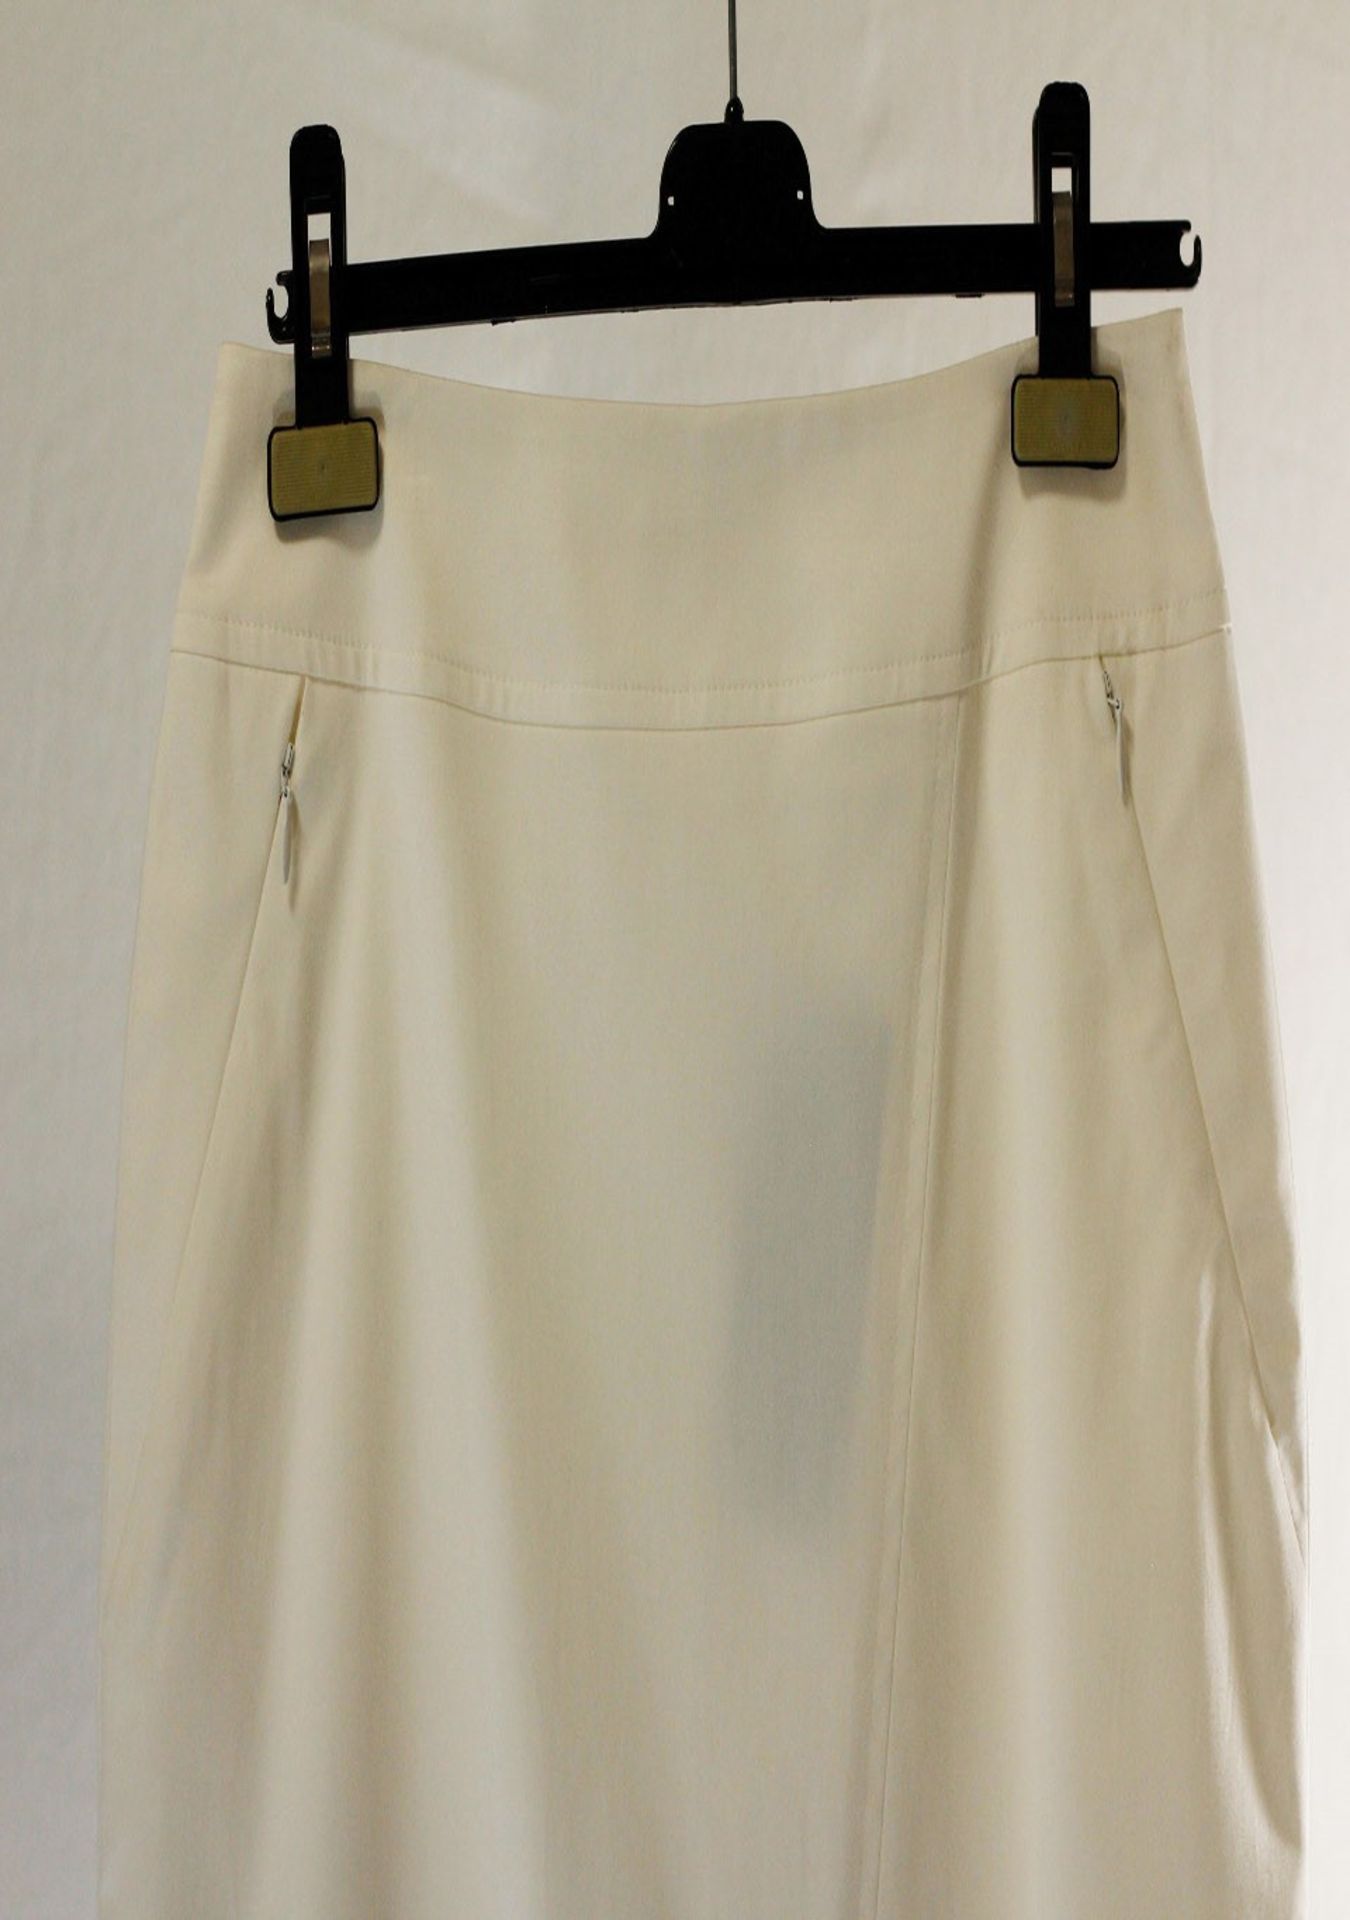 1 x Anne Belin White Skirt - Size: 14 - Material: 100% Cotton - From a High End Clothing Boutique In - Image 6 of 9